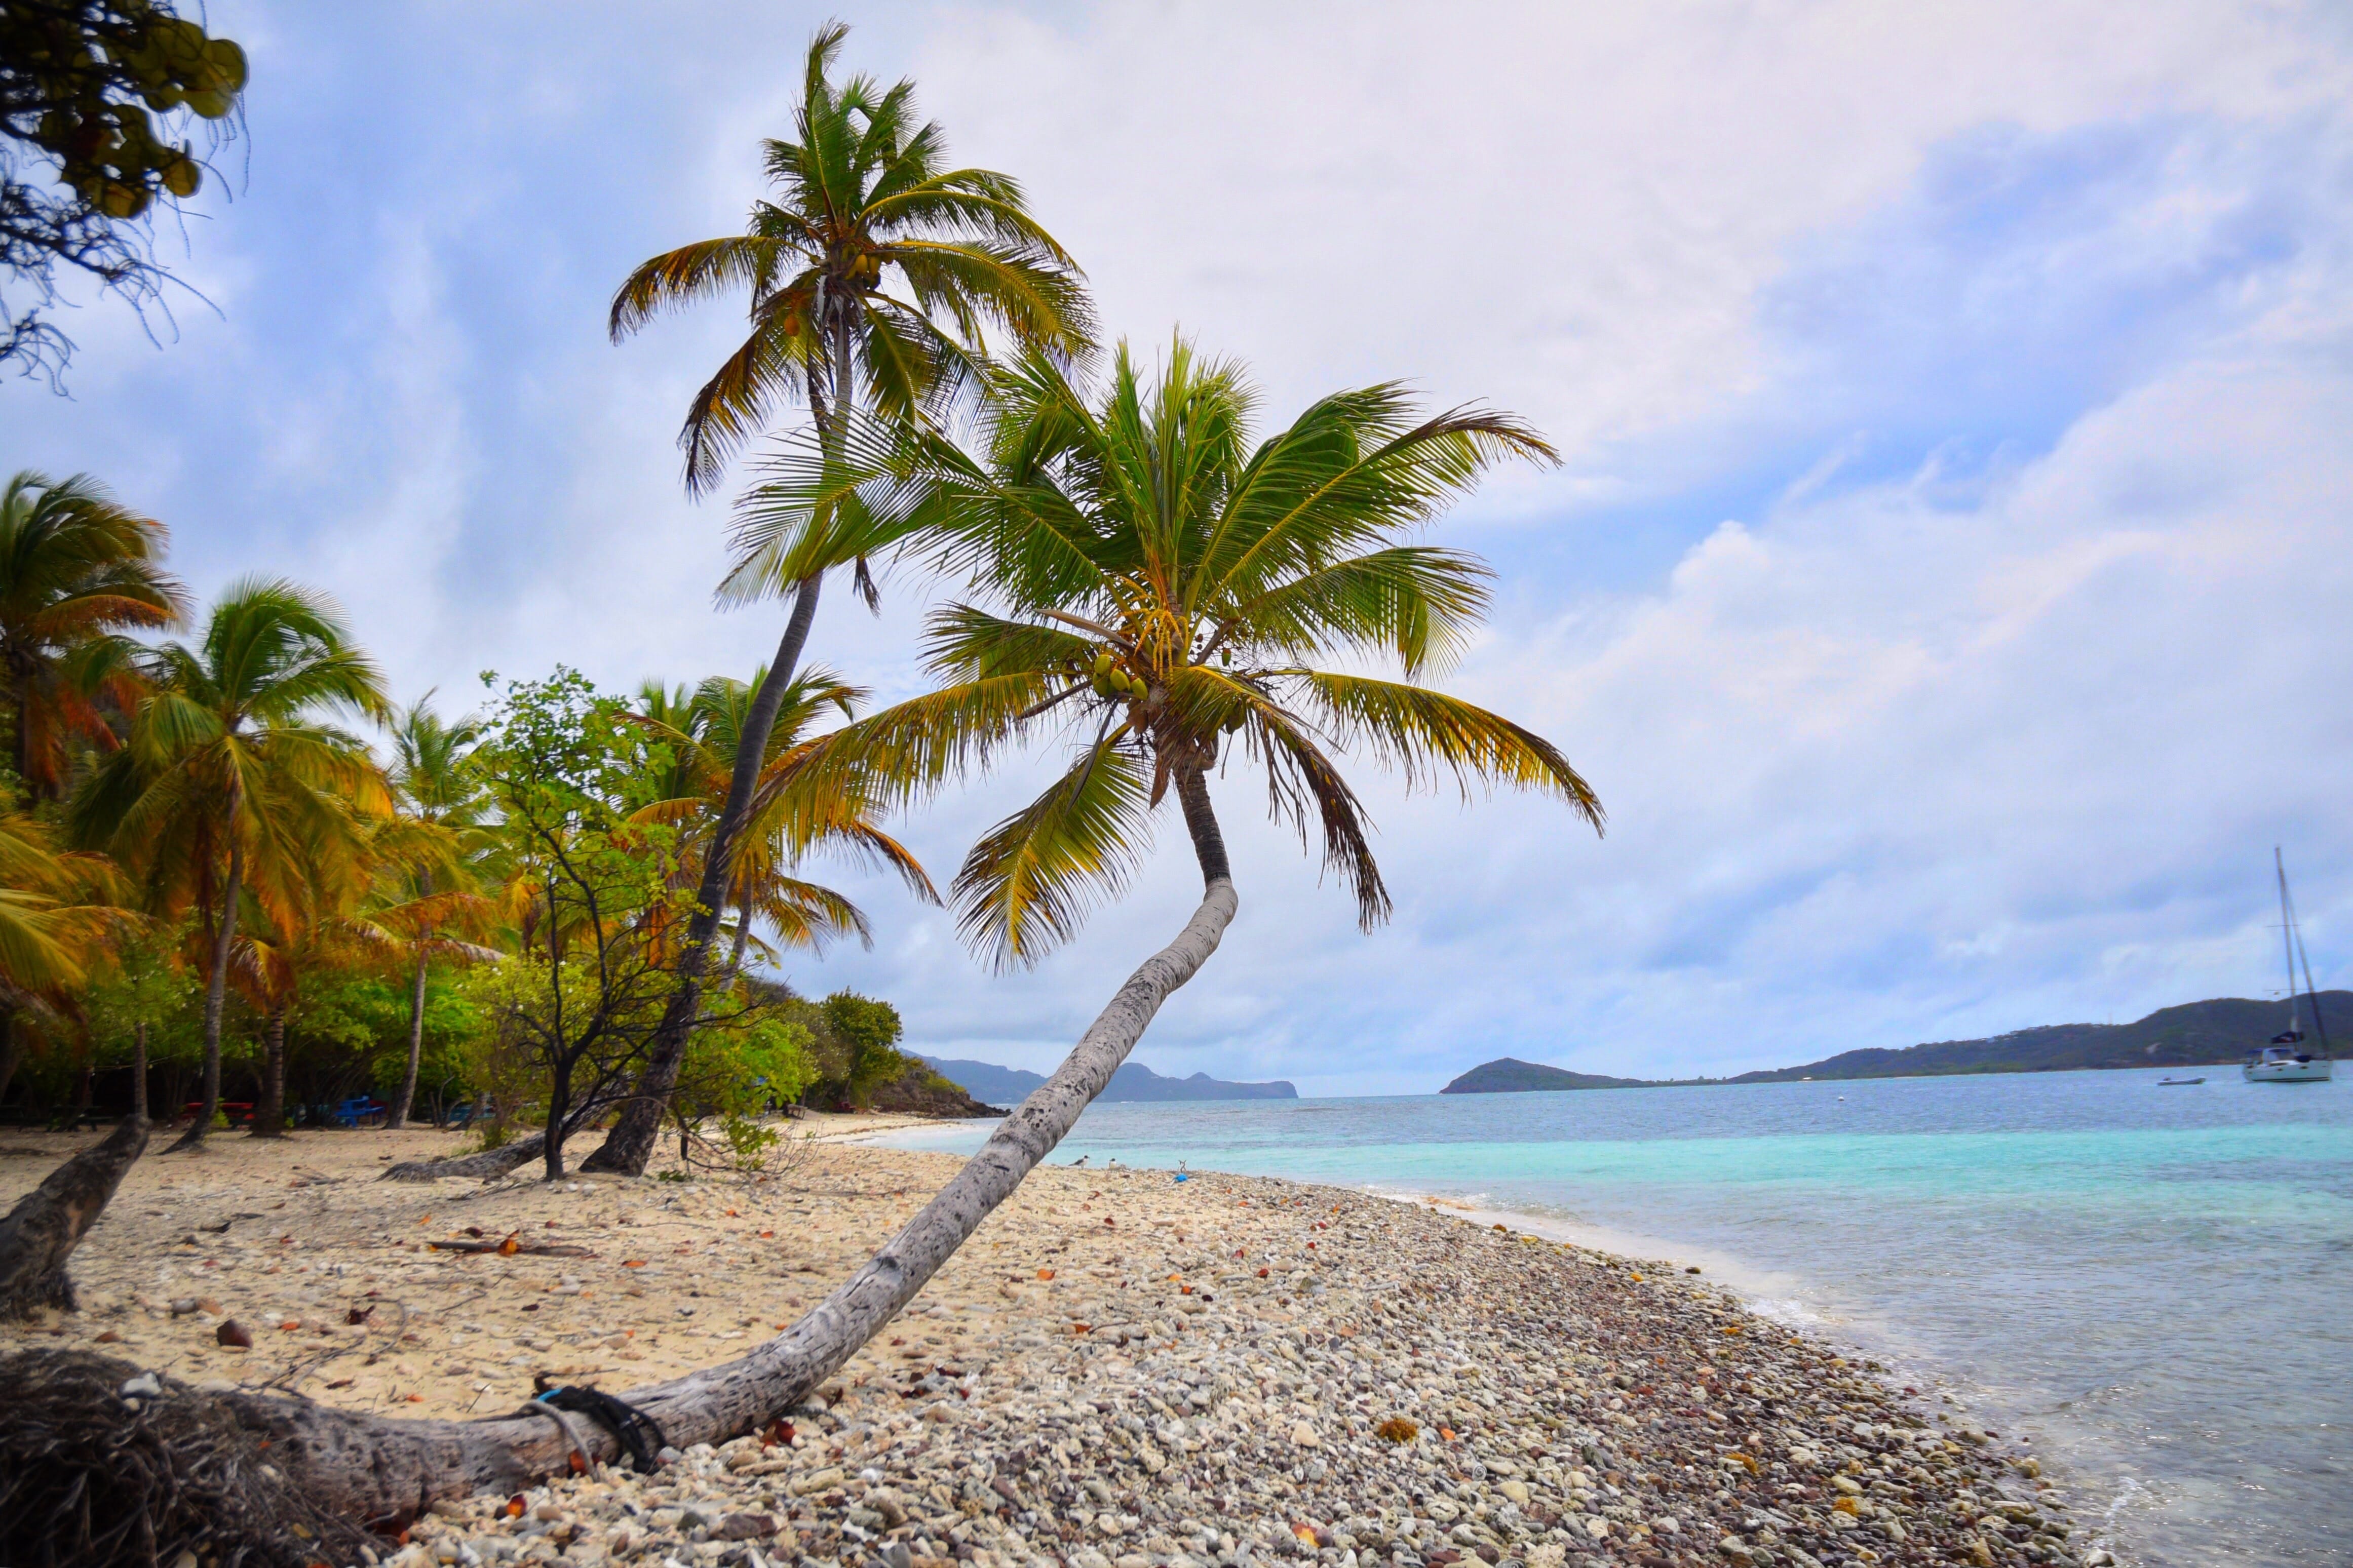 palm trees on a beach in the caribbean (st. vincent and the grenadines)